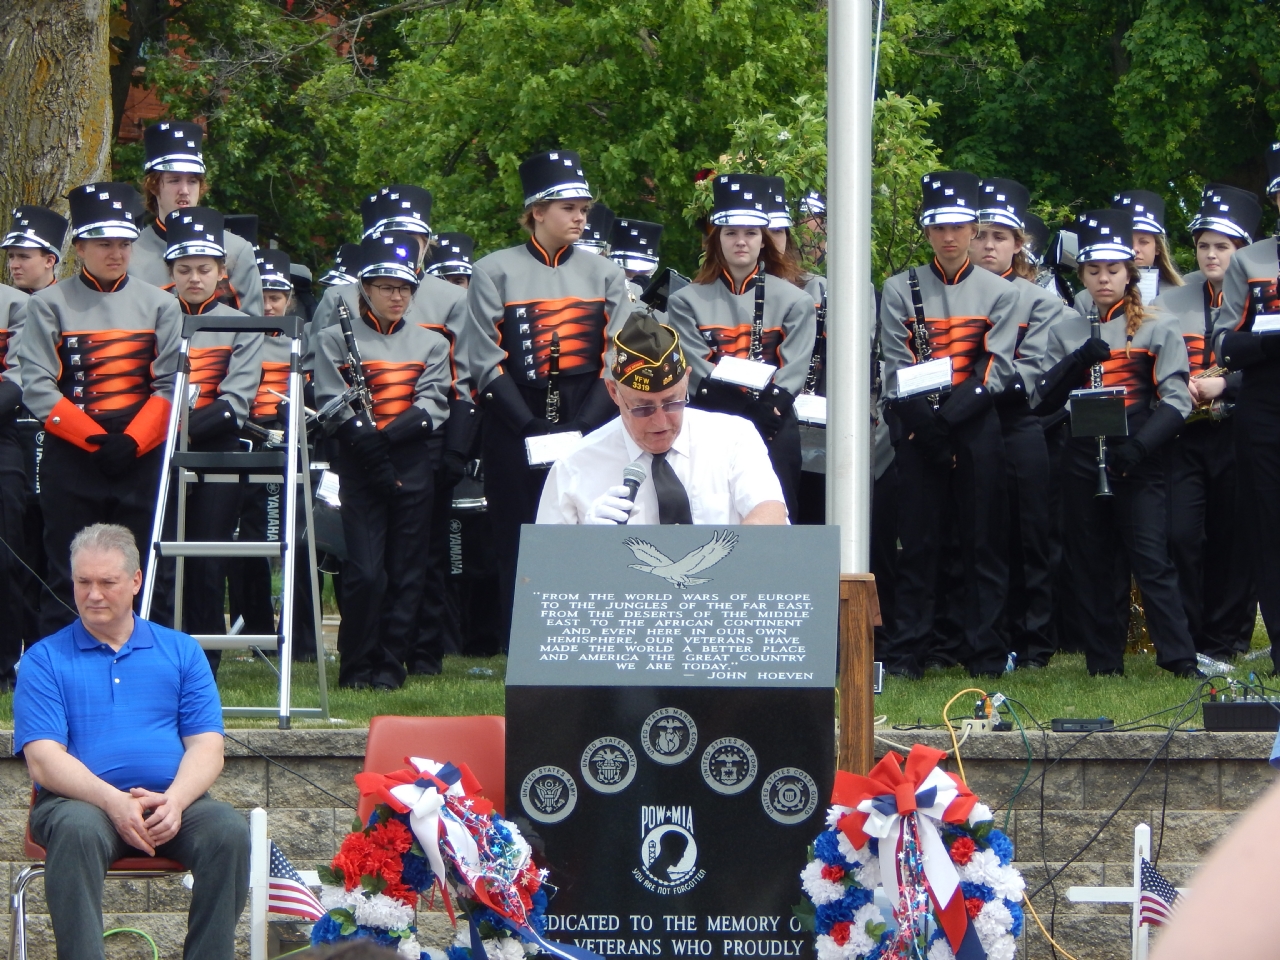 Officer of the Day Mel Rabideau addresses the crowd
